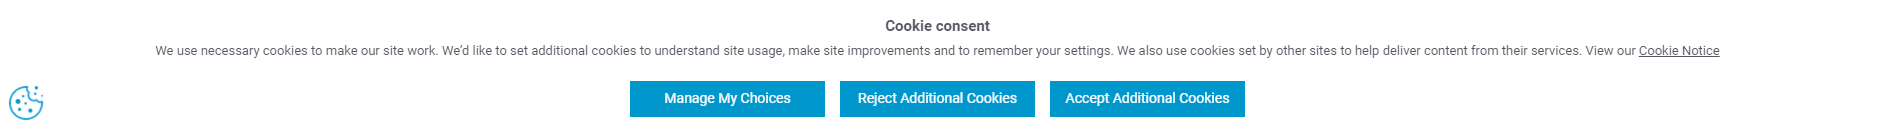 coventry university gdpr compliant implied consent cookie consent banner